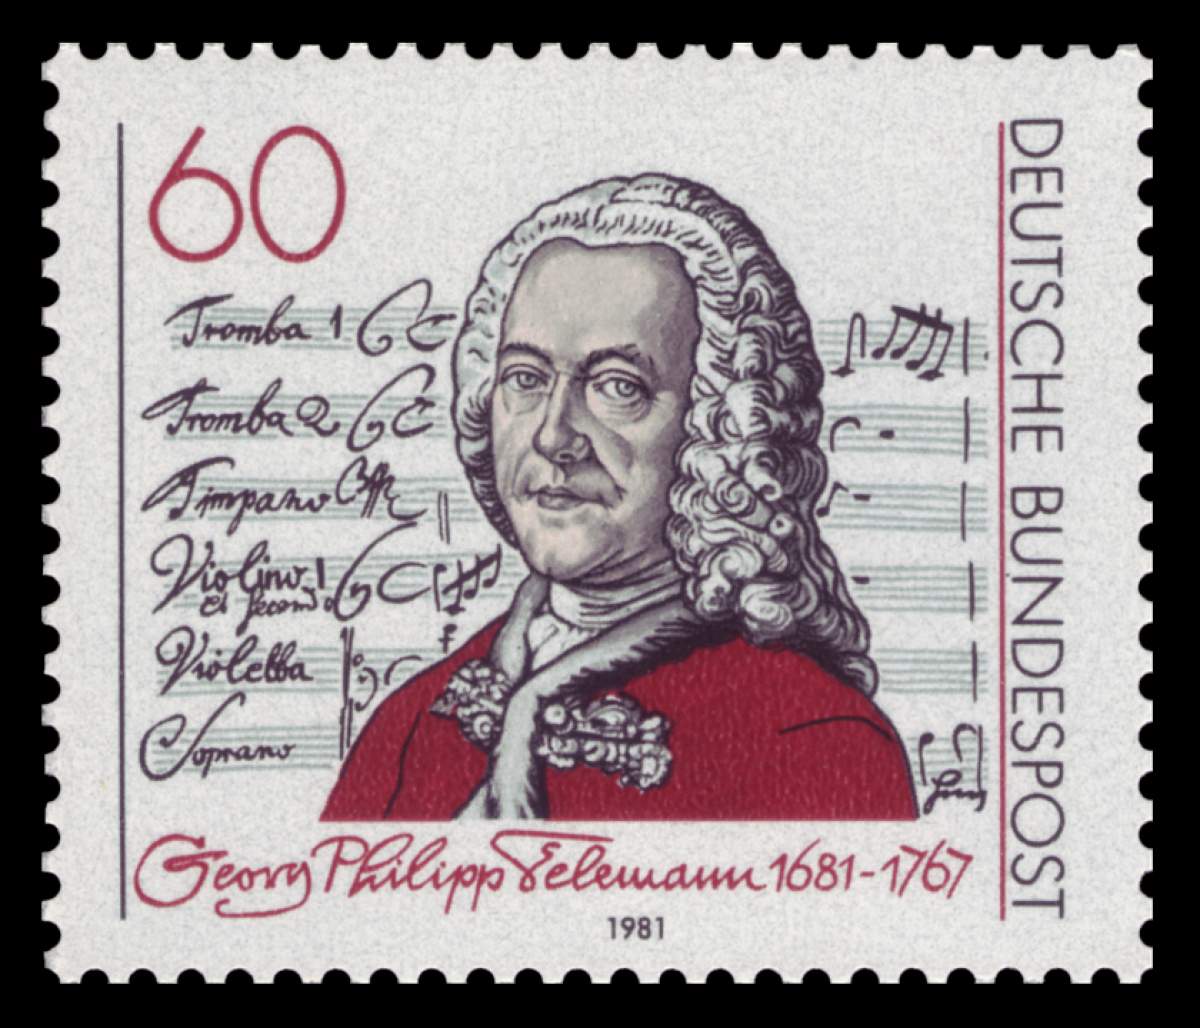 German stamp, issued to celebrate Telemann's 300th birthday in 1981.